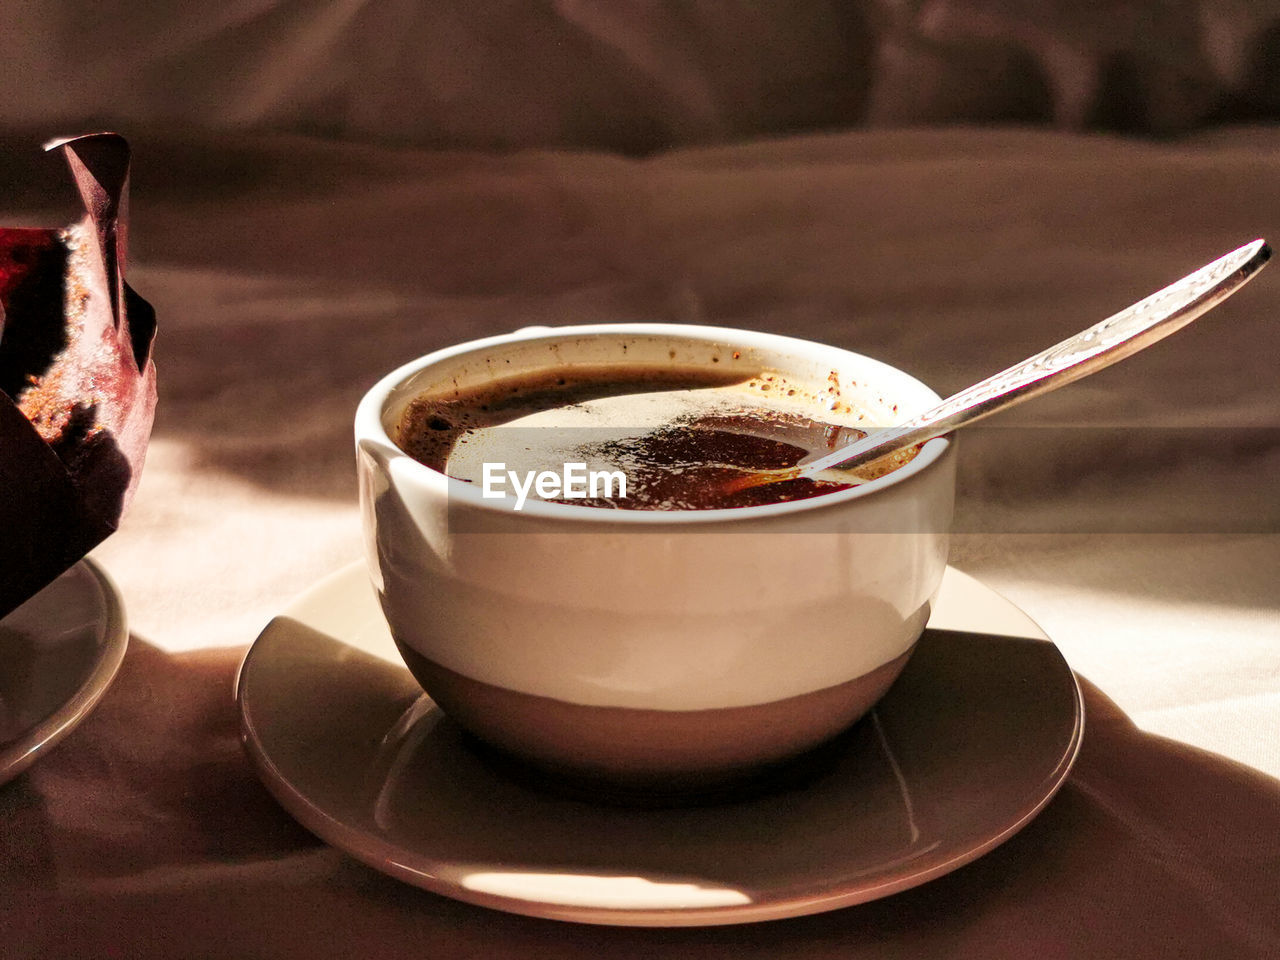 CLOSE-UP OF COFFEE CUP ON TABLE AGAINST BLACK BACKGROUND